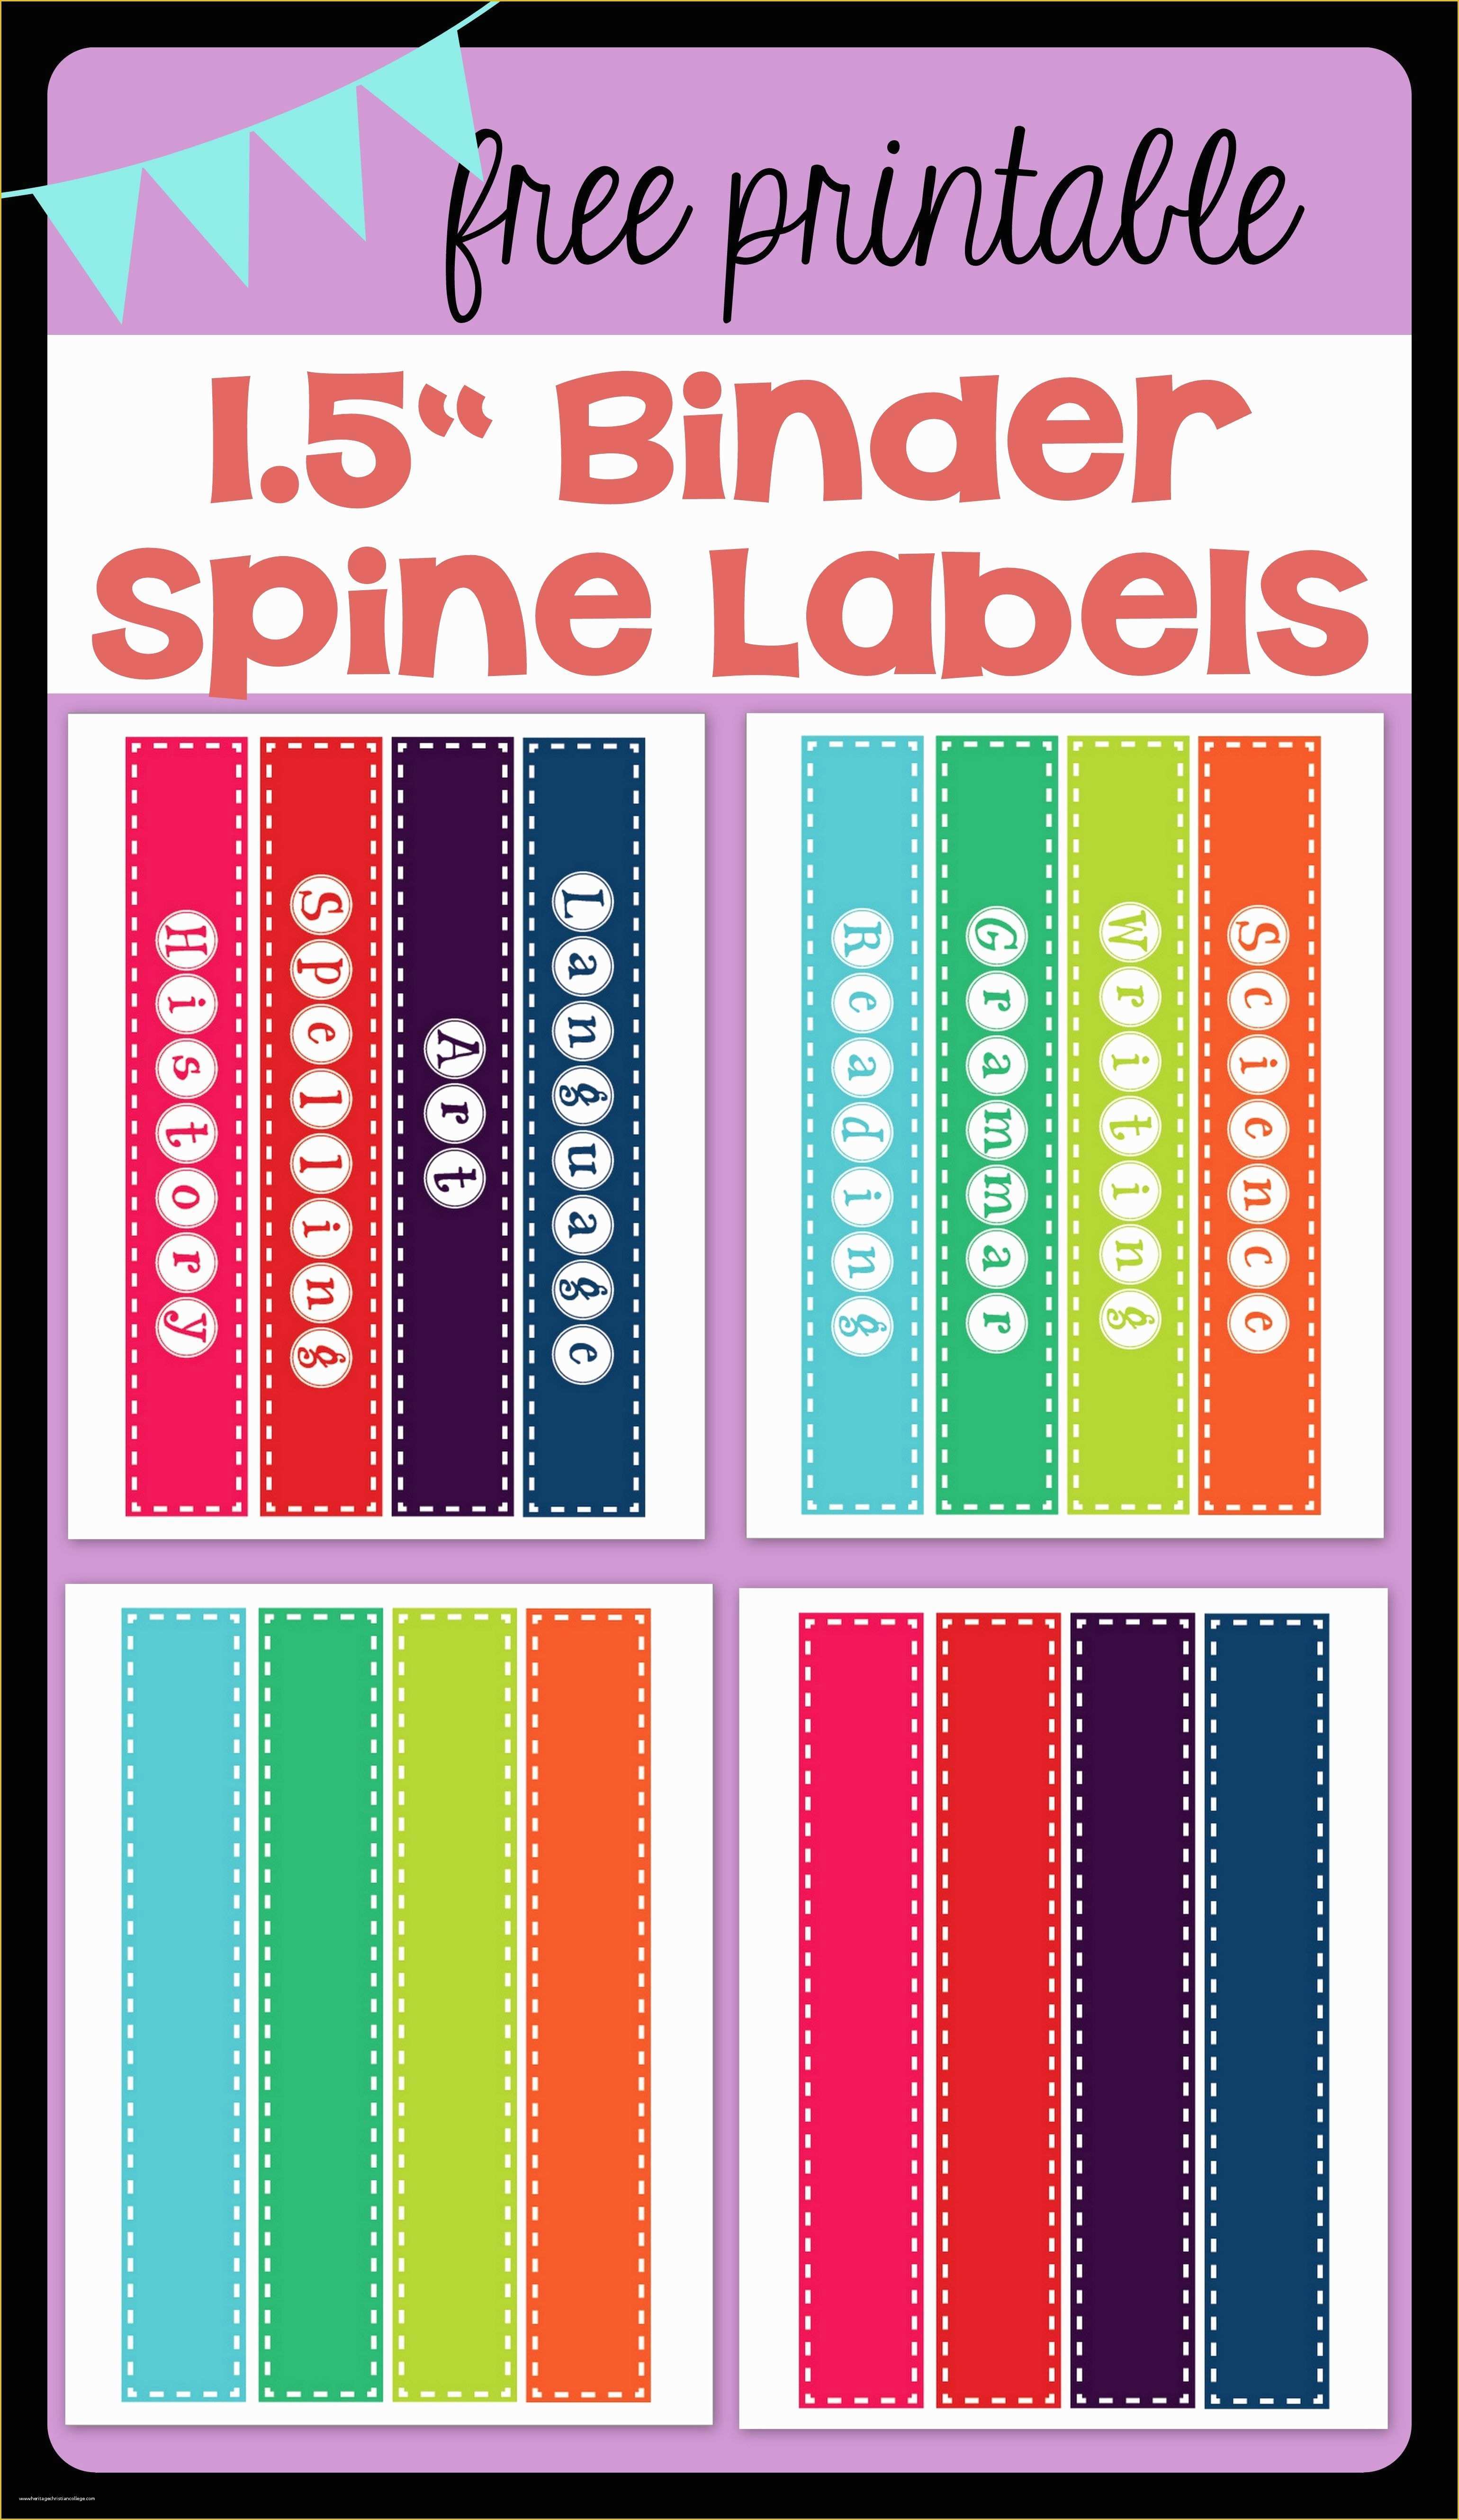 Free Binder Cover and Spine Templates Of Free Printable 1 5" Binder Spine Labels for Basic School